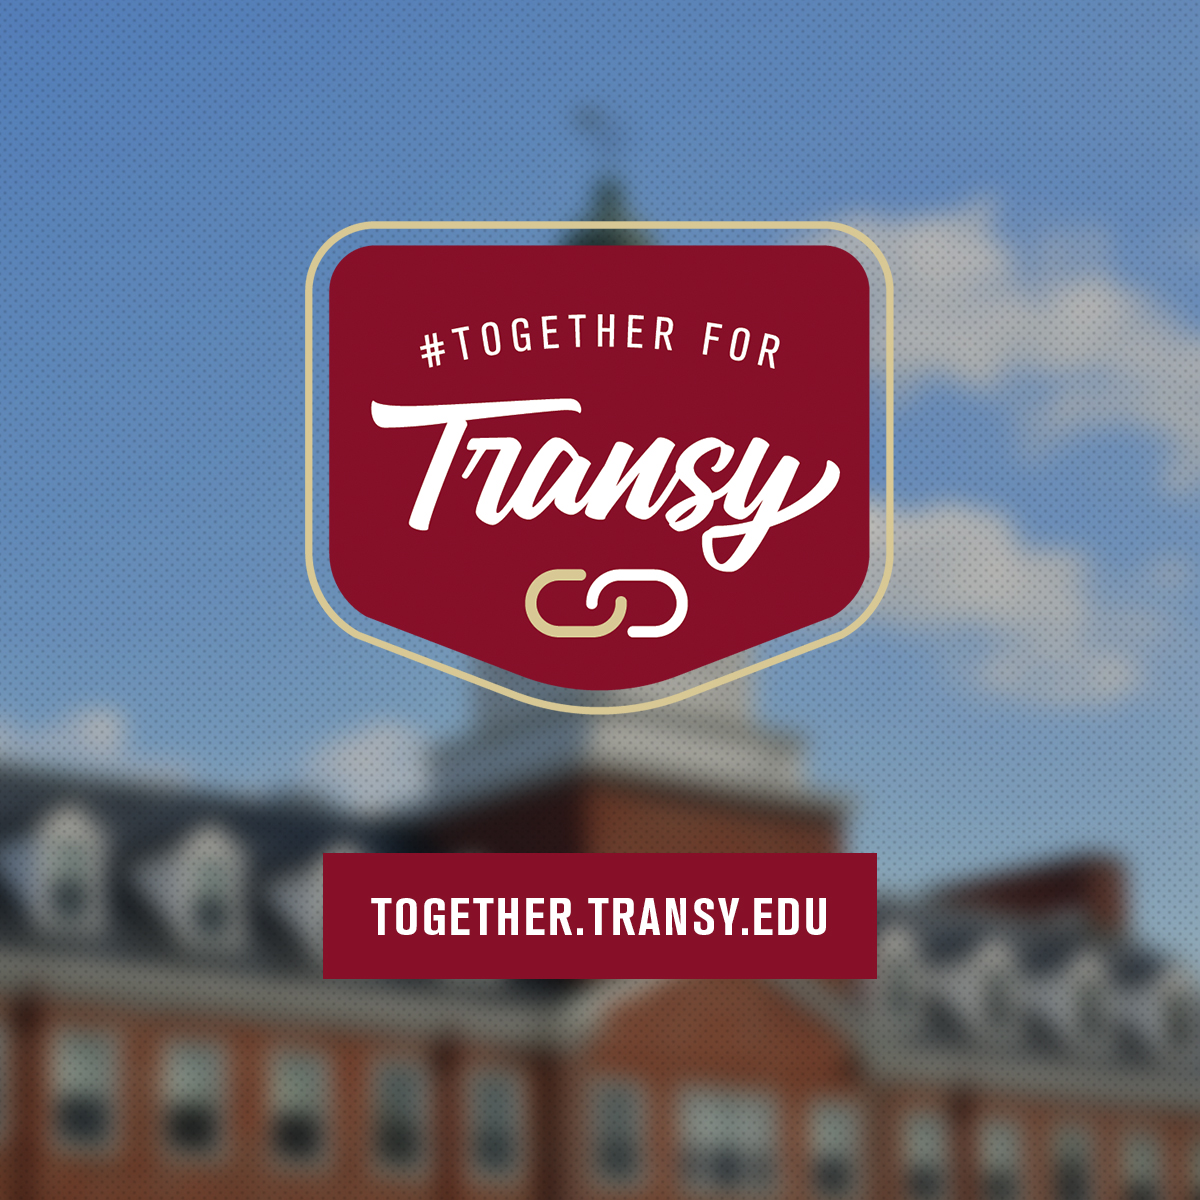 Support students during Together for Transy on Thursday